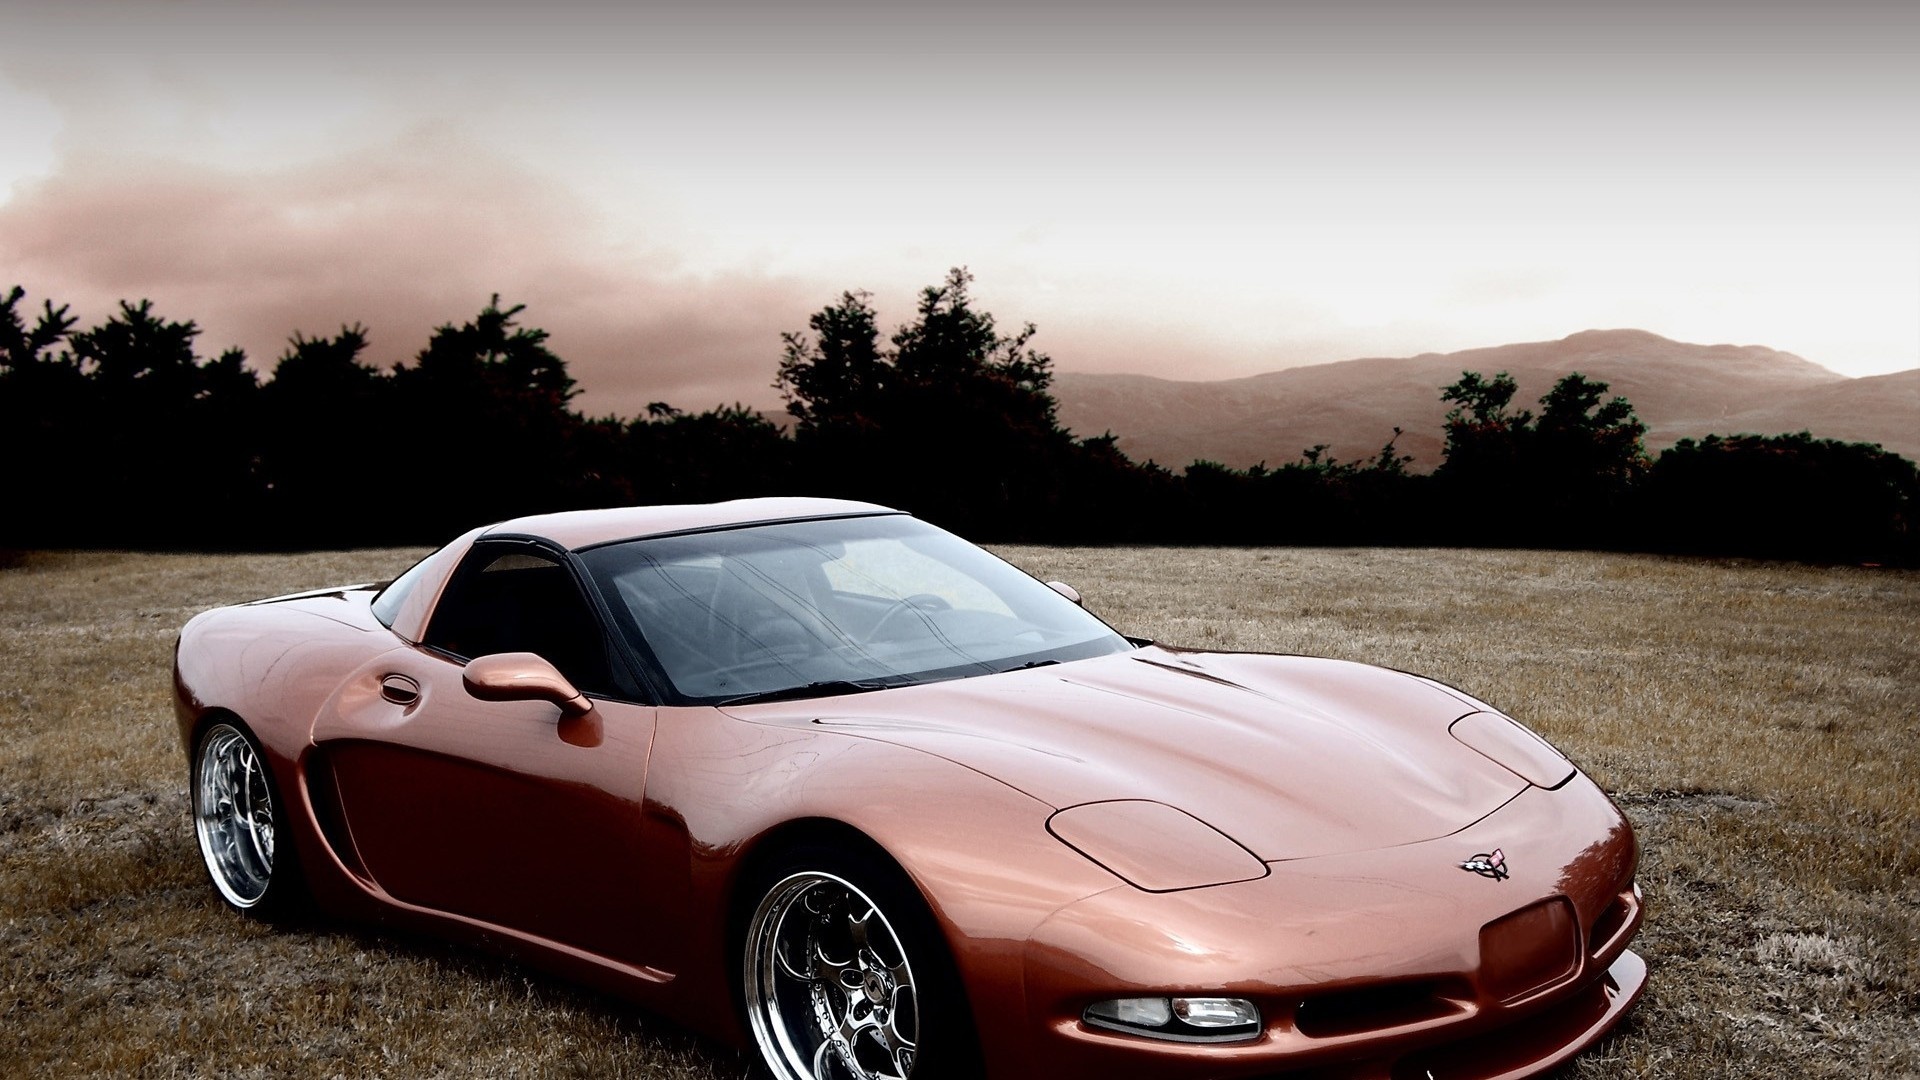 Corvette C5 Wide Body - Beautiful Car Background Pictures Hd , HD Wallpaper & Backgrounds